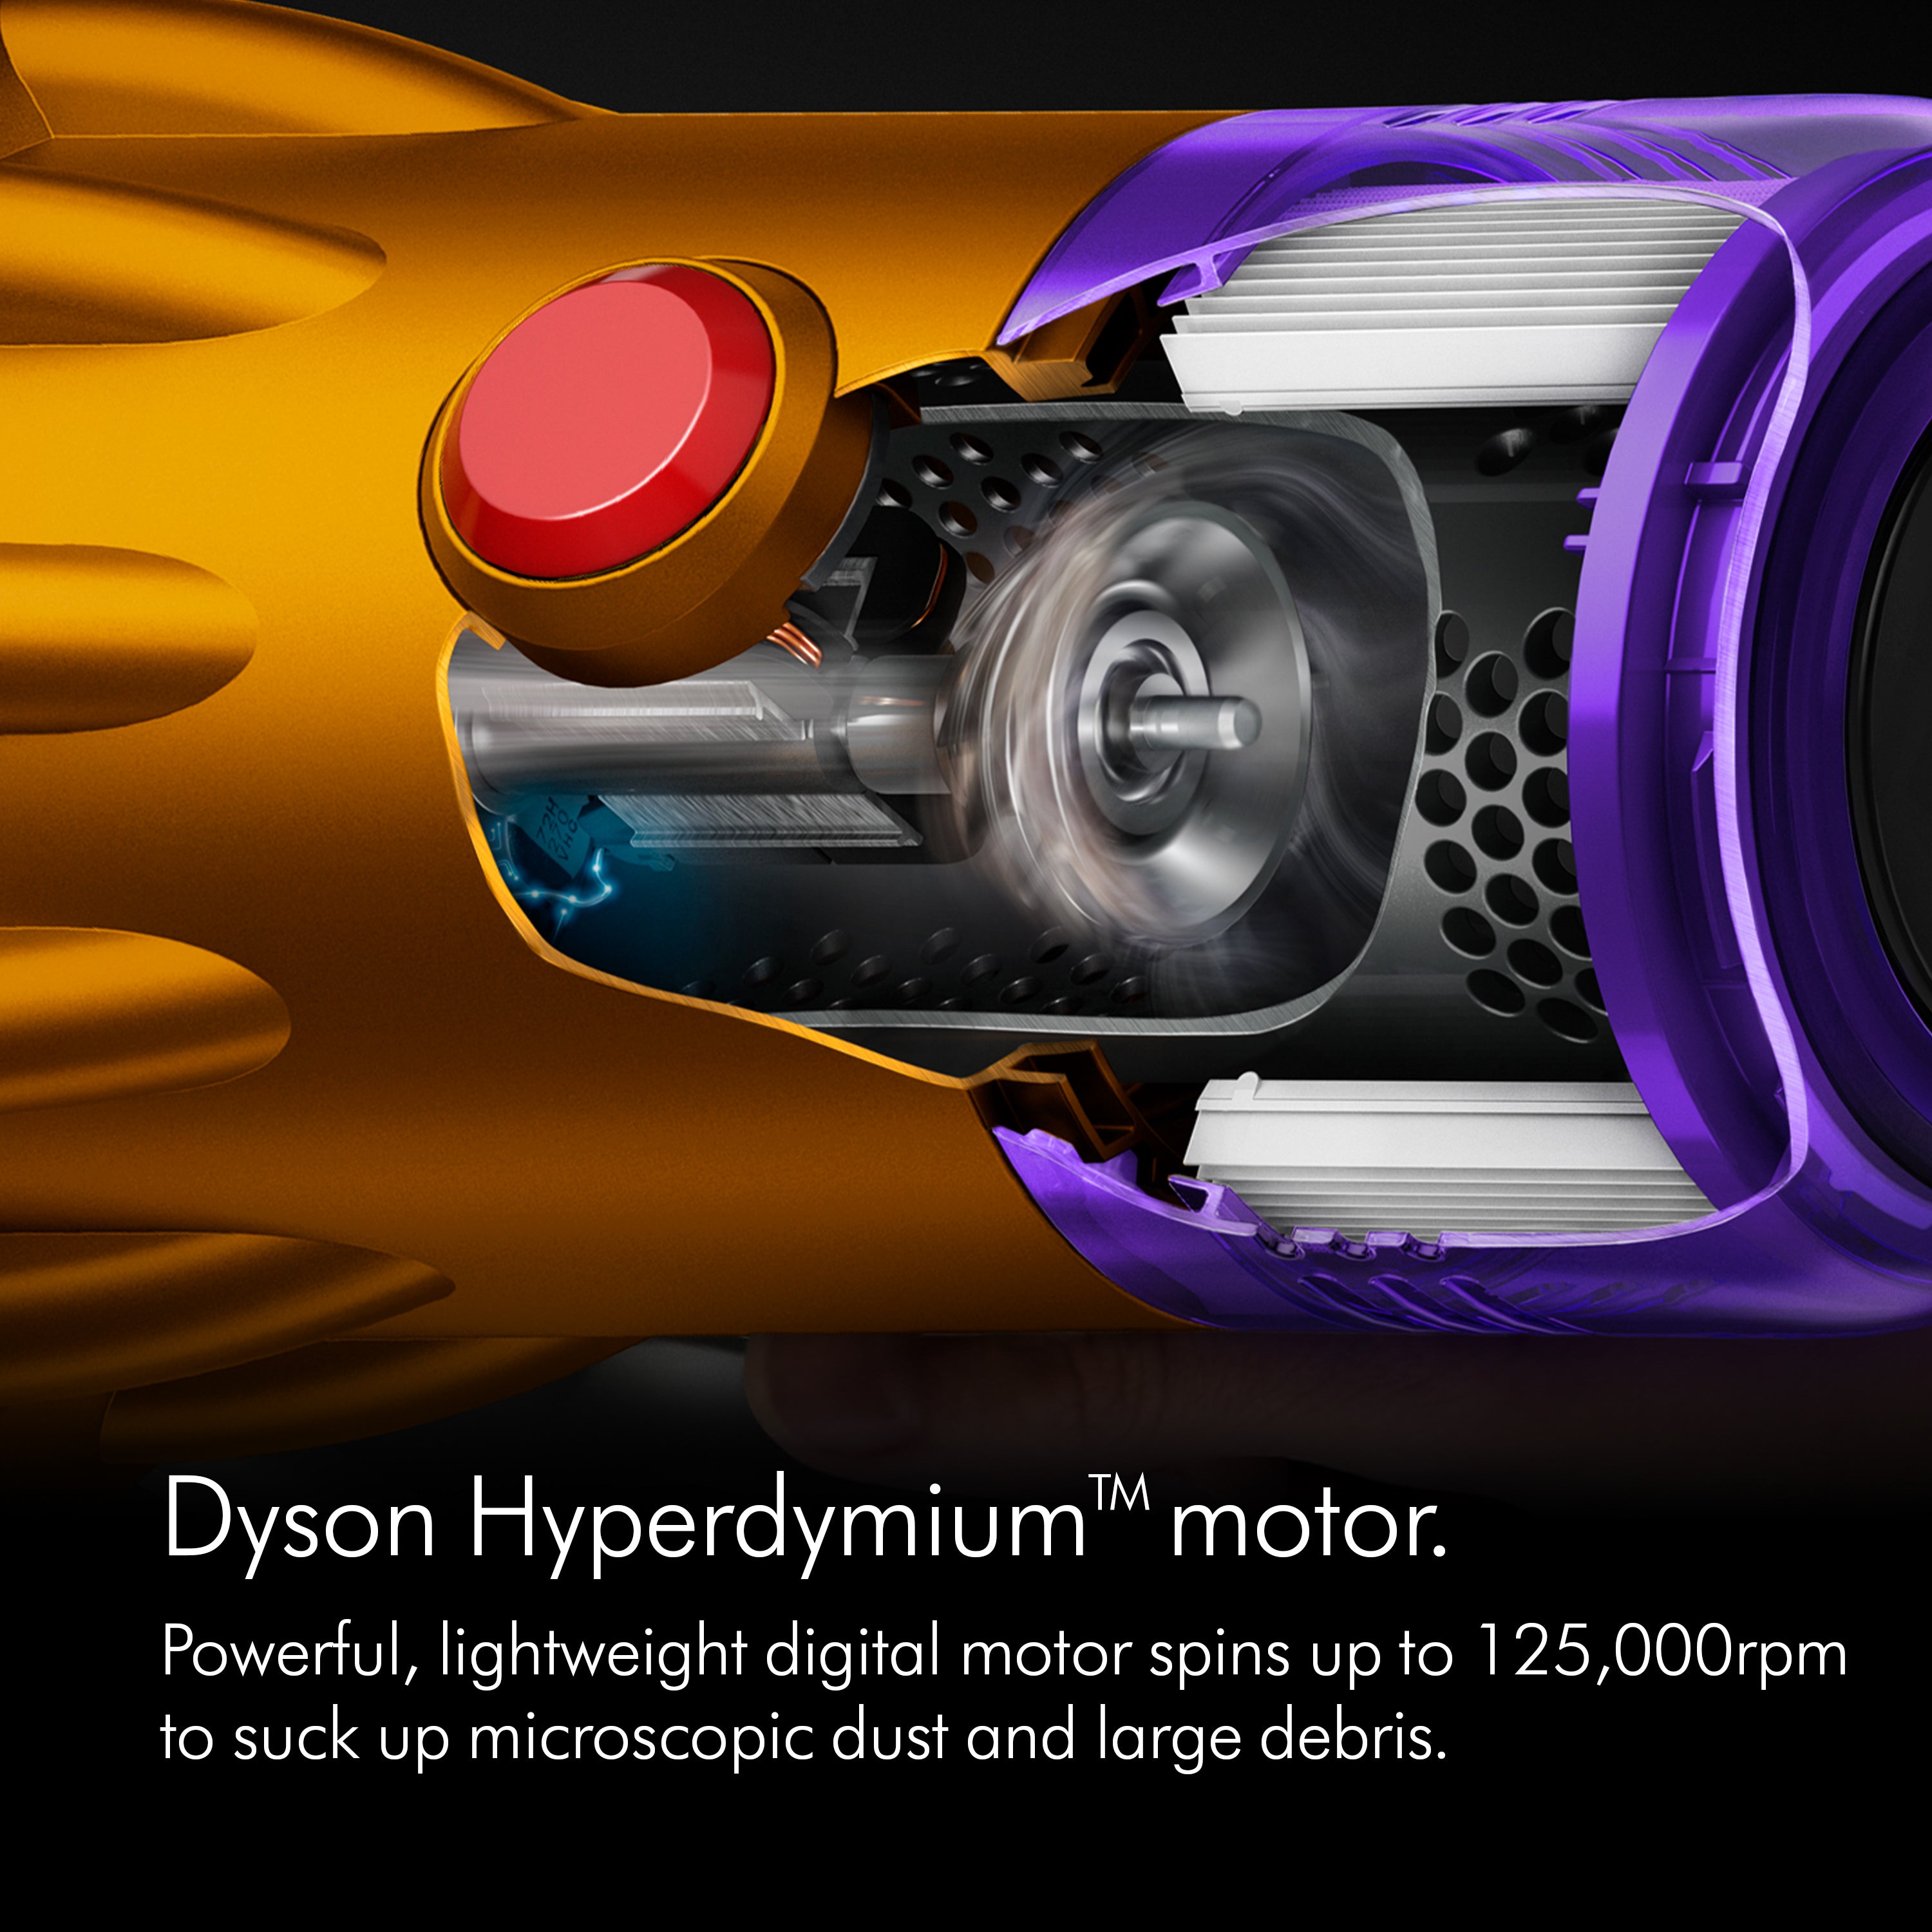 Dyson V12 Slim Absolute Vacuum Cleaner 369542-01